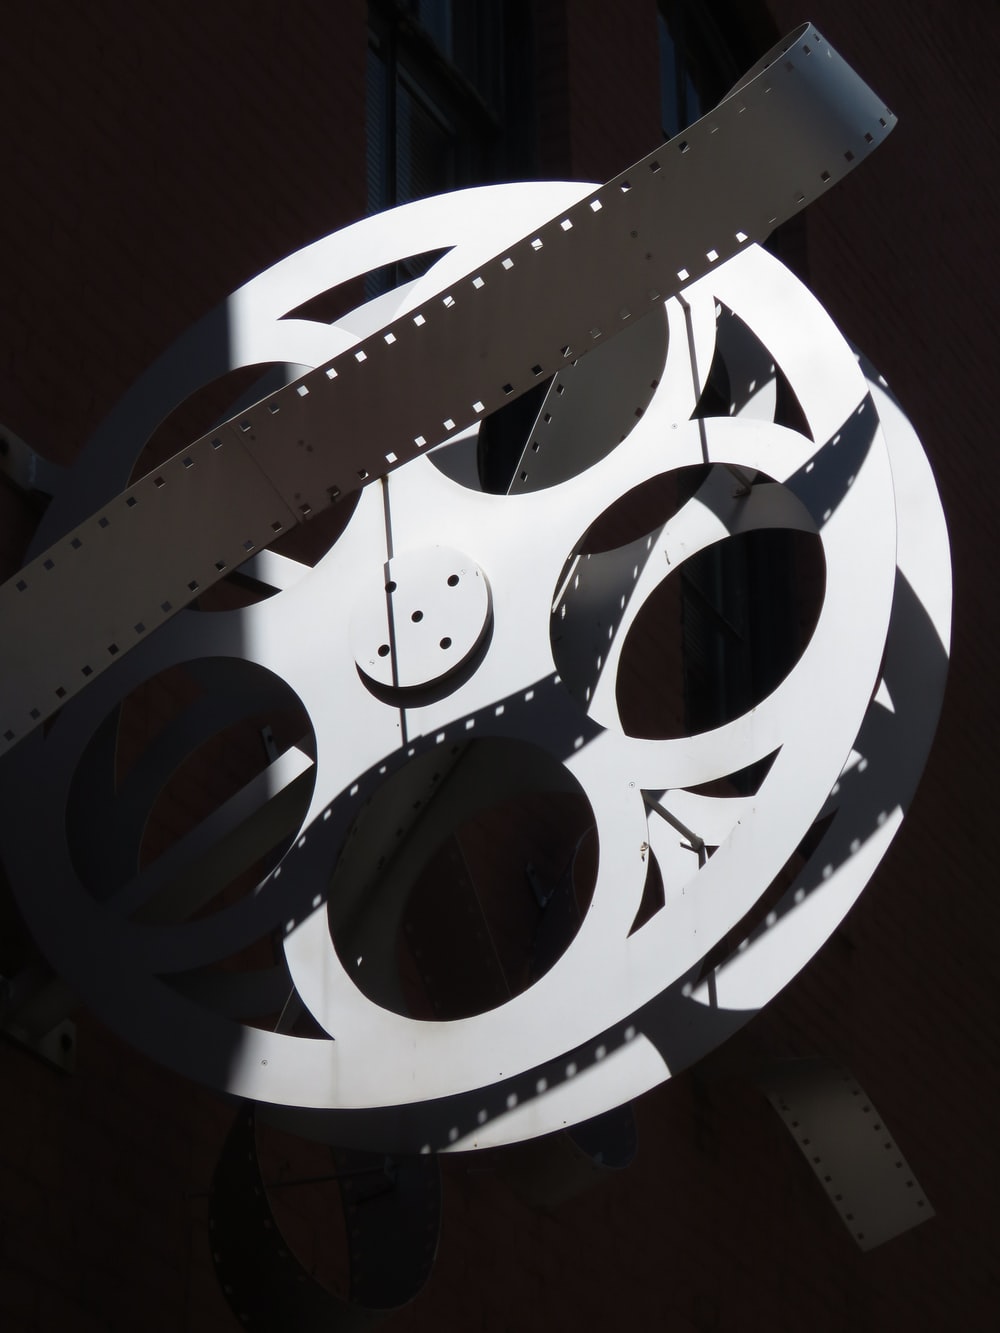 Film Reel Picture [HQ]. Download Free Image